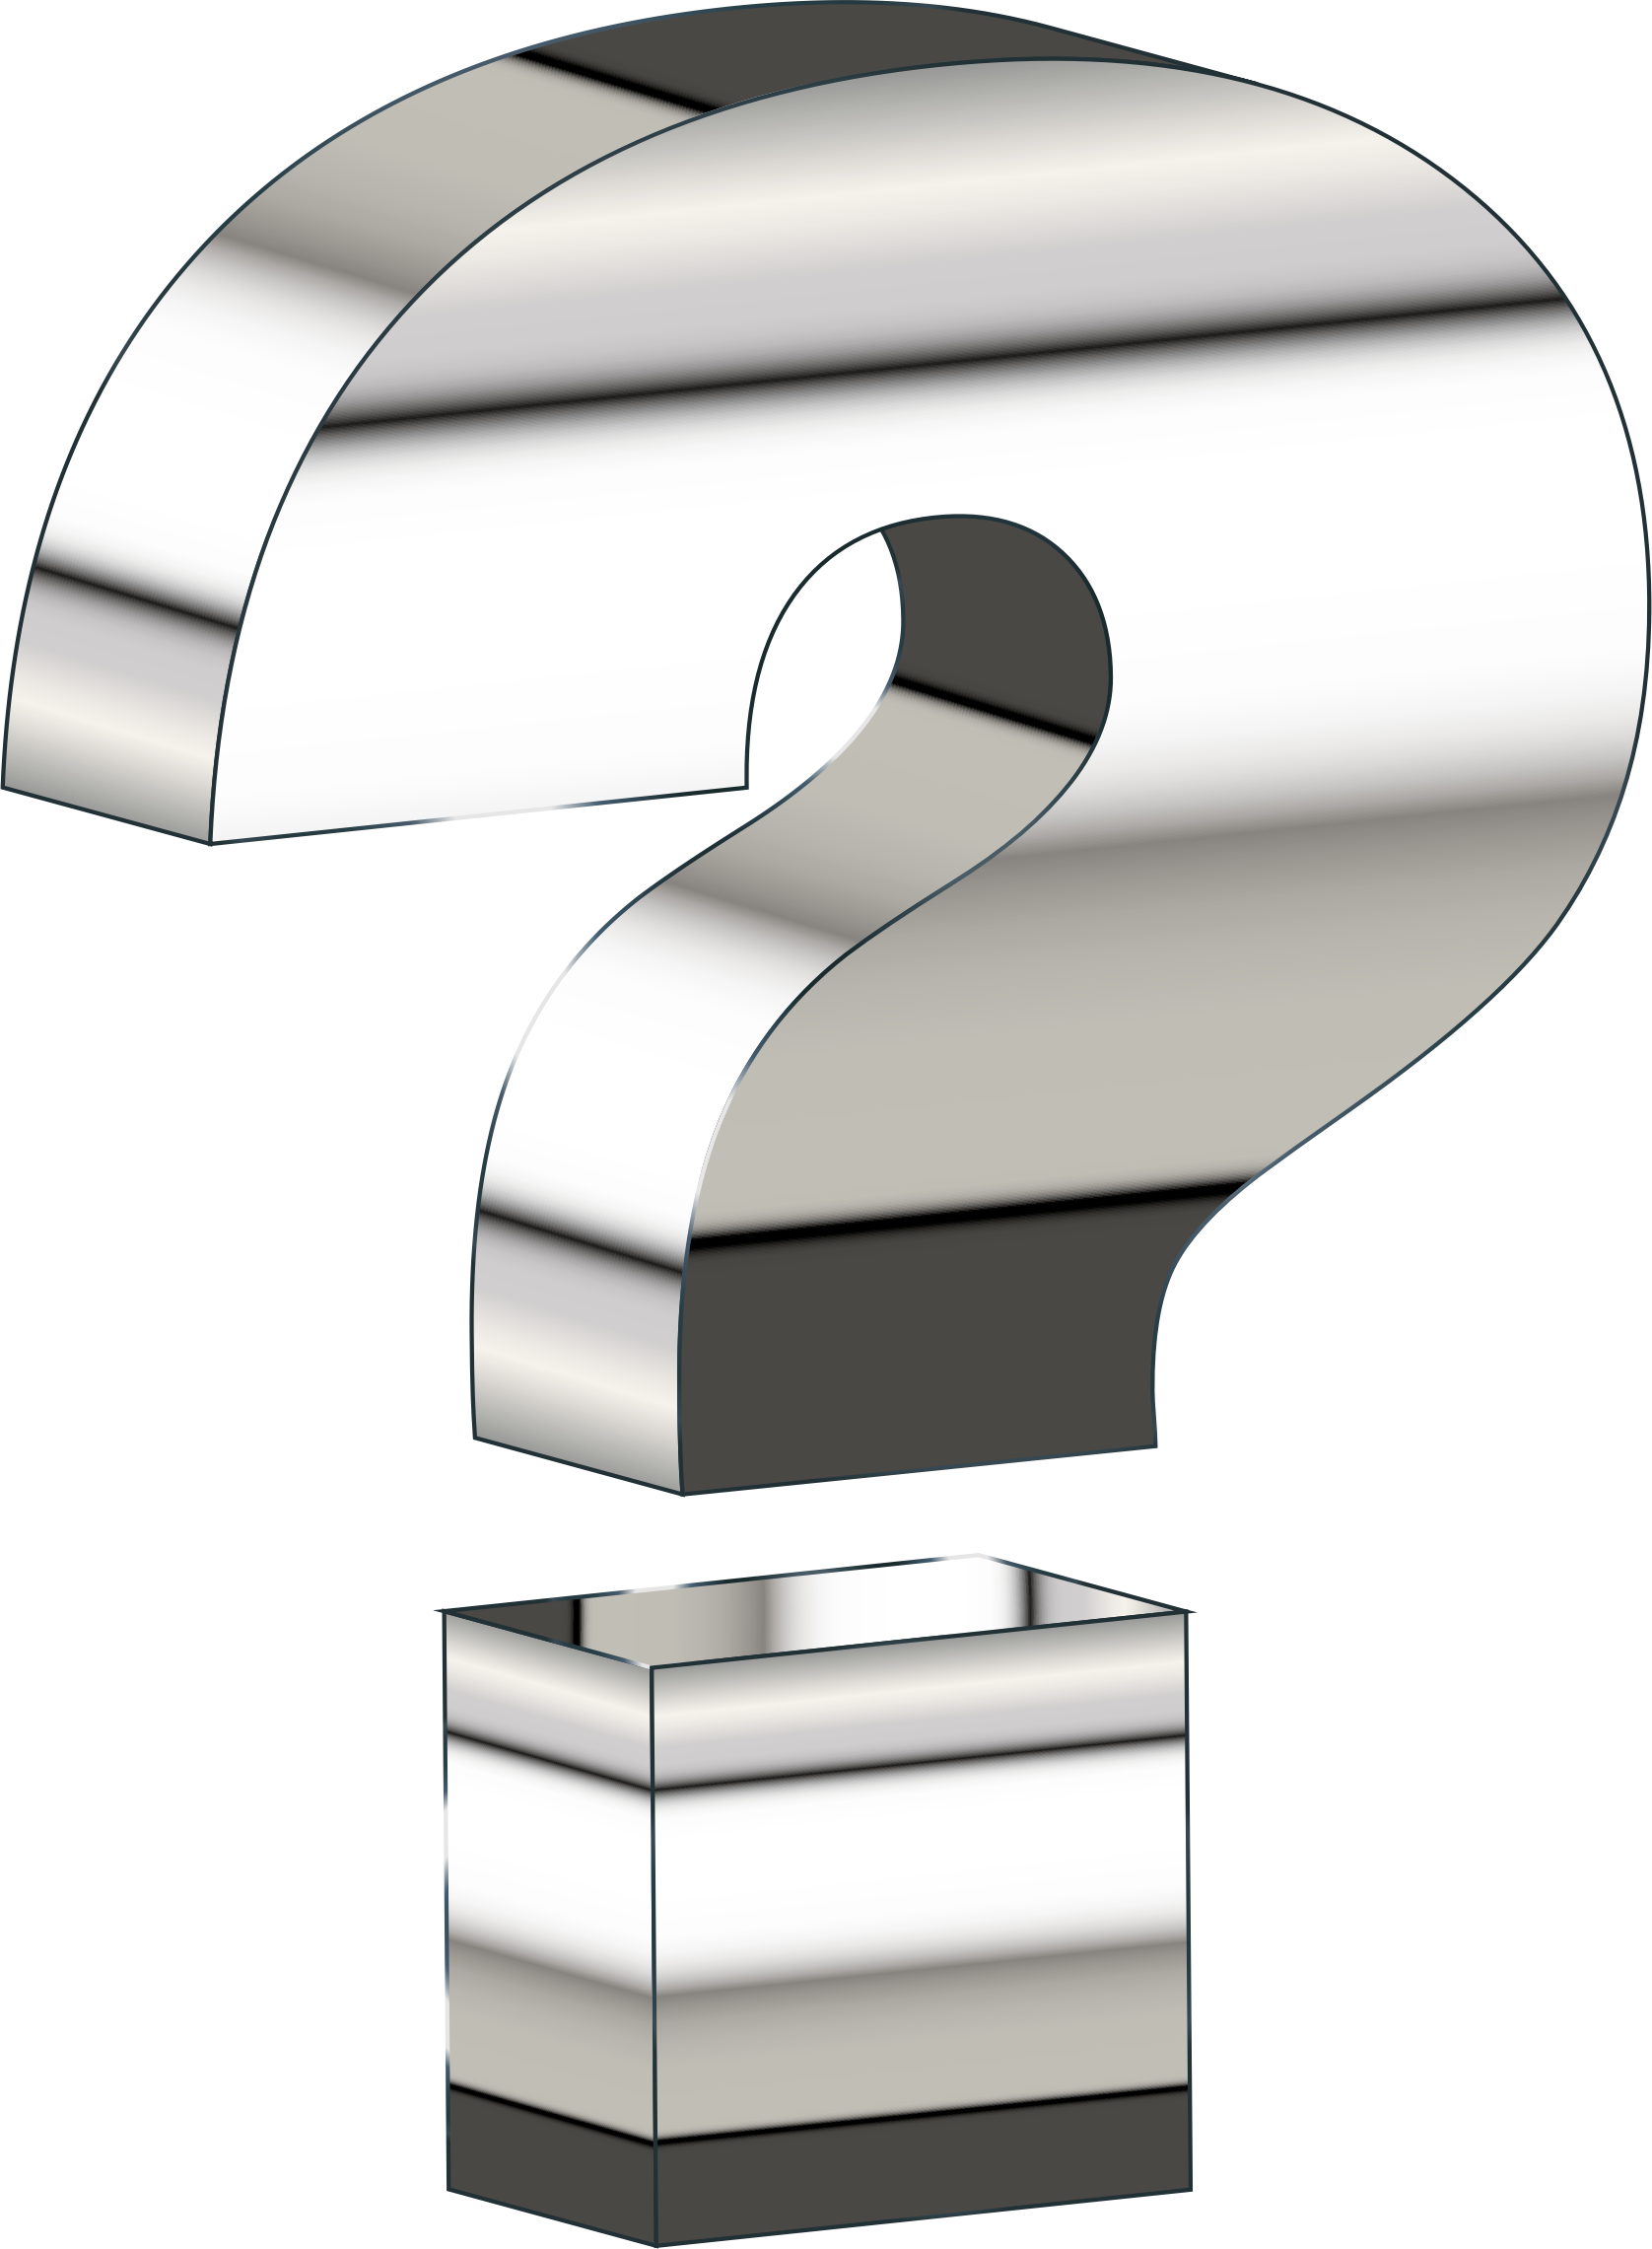 Microsoft clipart question mark. Free images black and